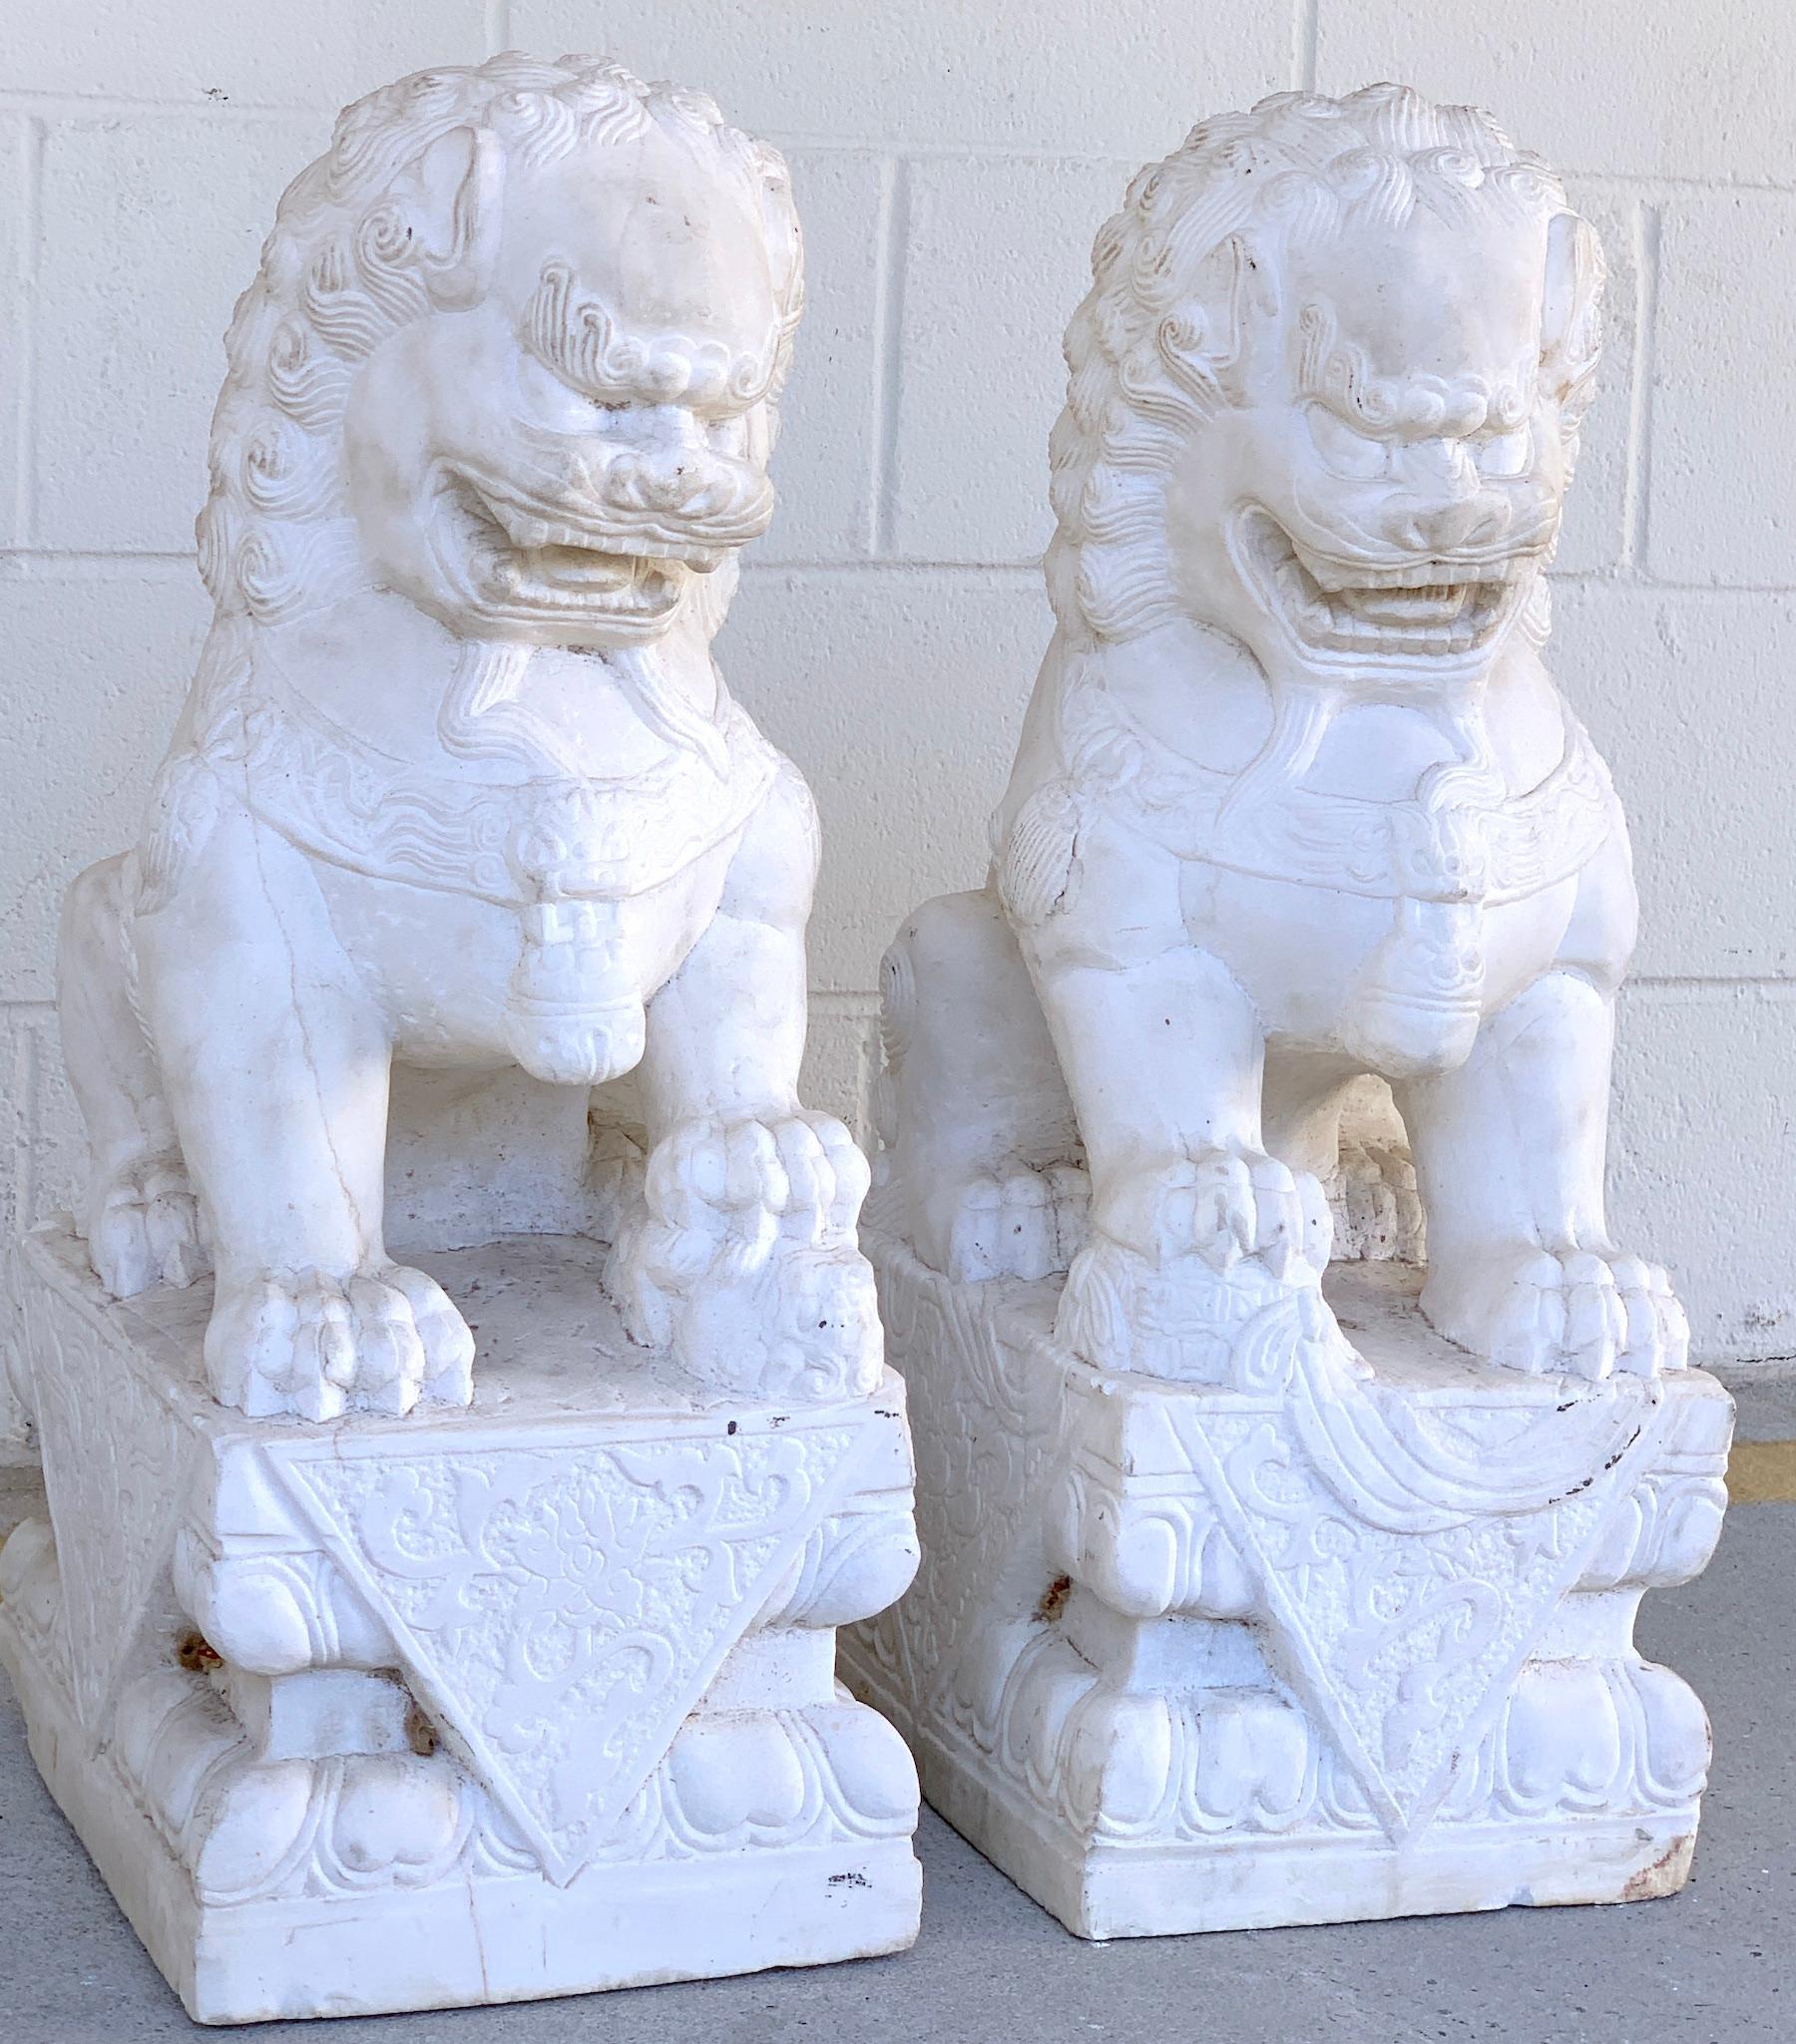 Fine pair of Chinese Export marble seated foo dogs, well carved, the male standing 26-inches high, the female 25.5-inches high, beautiful weathered patina. Ready to place, some chipping to the back corners, presents well.